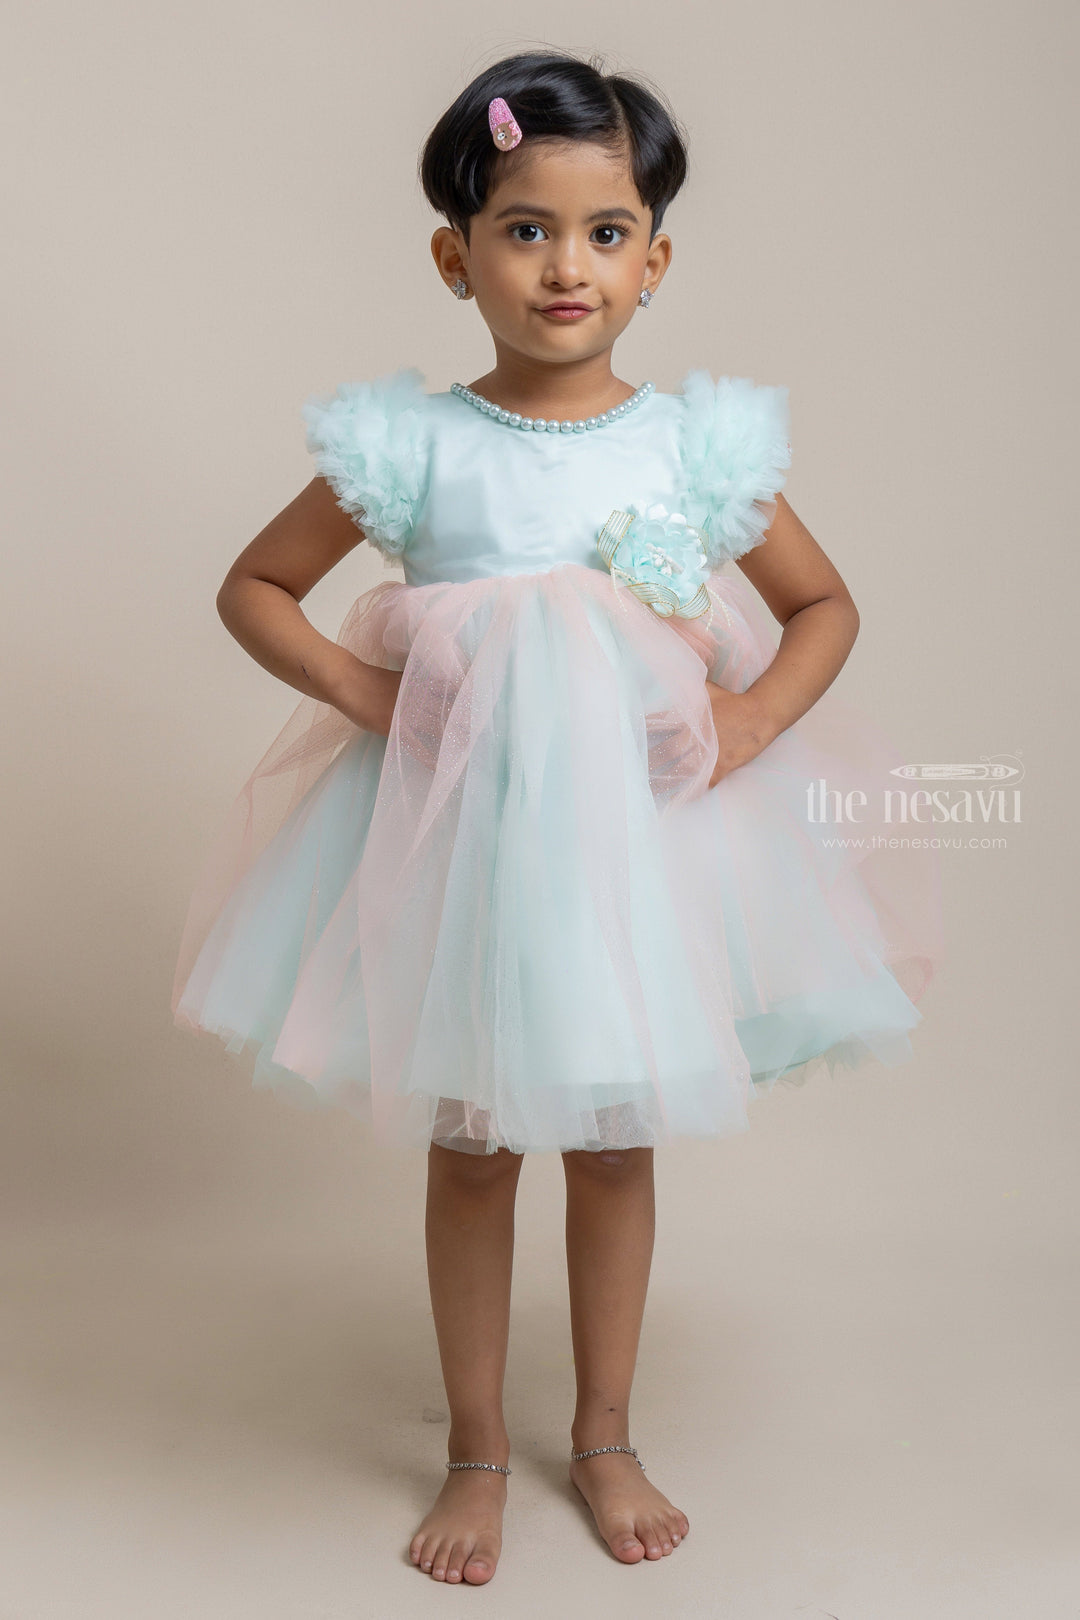 The Nesavu Girls Tutu Frock Elegant Teal Blue Party Frock With Pearl Sequenced Neck Design For Girls Nesavu 16 (1Y) / Blue PF117B-16 Fashionable party frocks | High-quality party frocks | The Nesavu